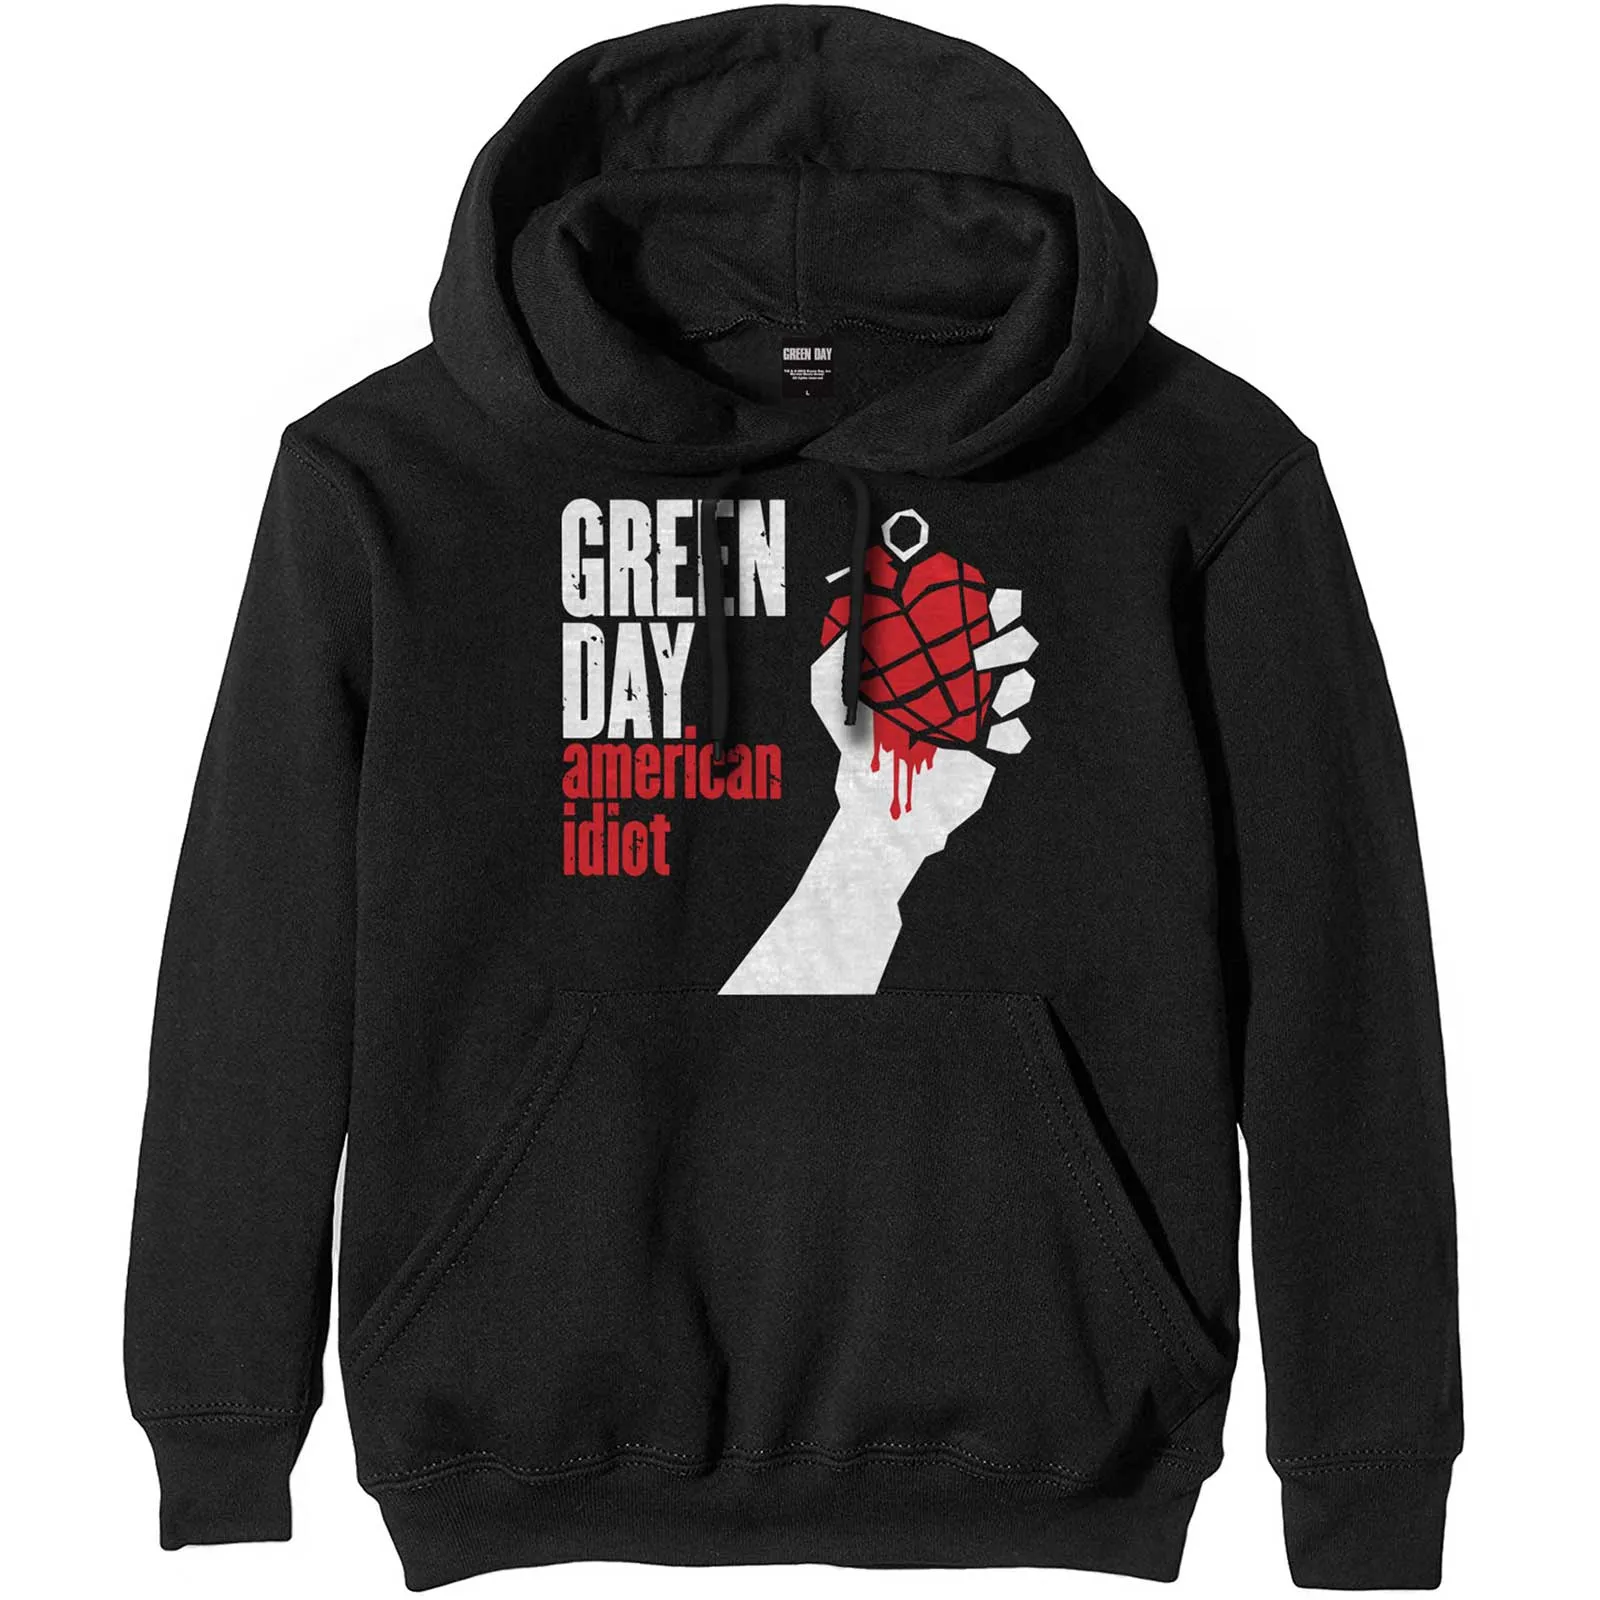 Green Day - Unisex Pullover Hoodie American Idiot artwork